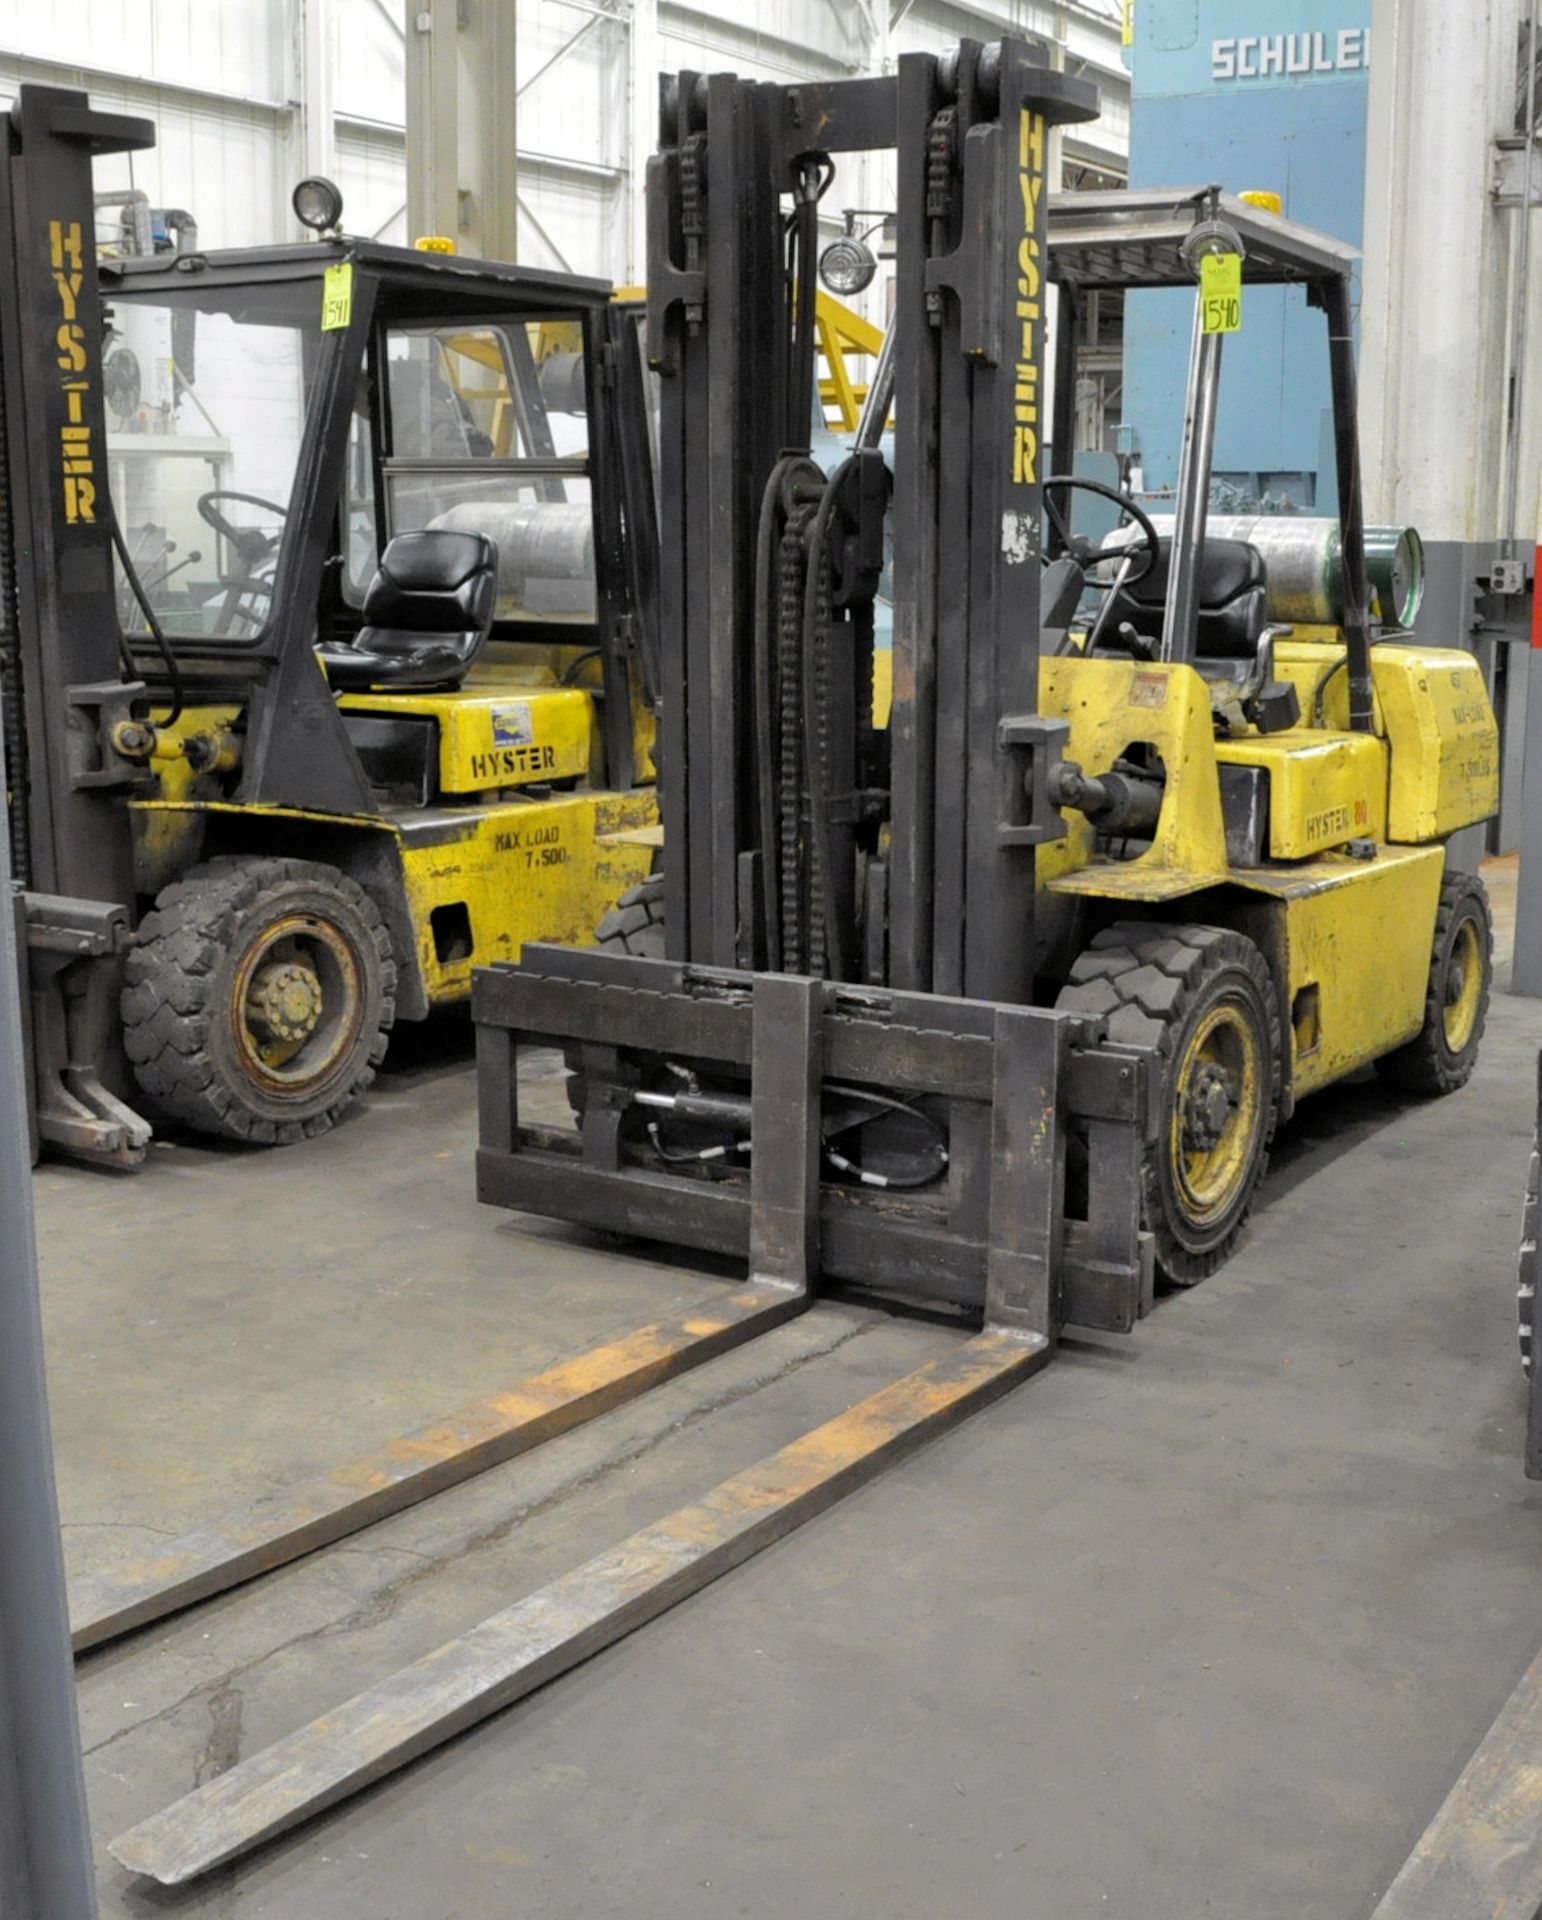 Hyster Model H80XL, 8,000-Lbs. Capacity LP Gas Forklift Truck, S/n F005D06989P, 169.5" Lift, Side